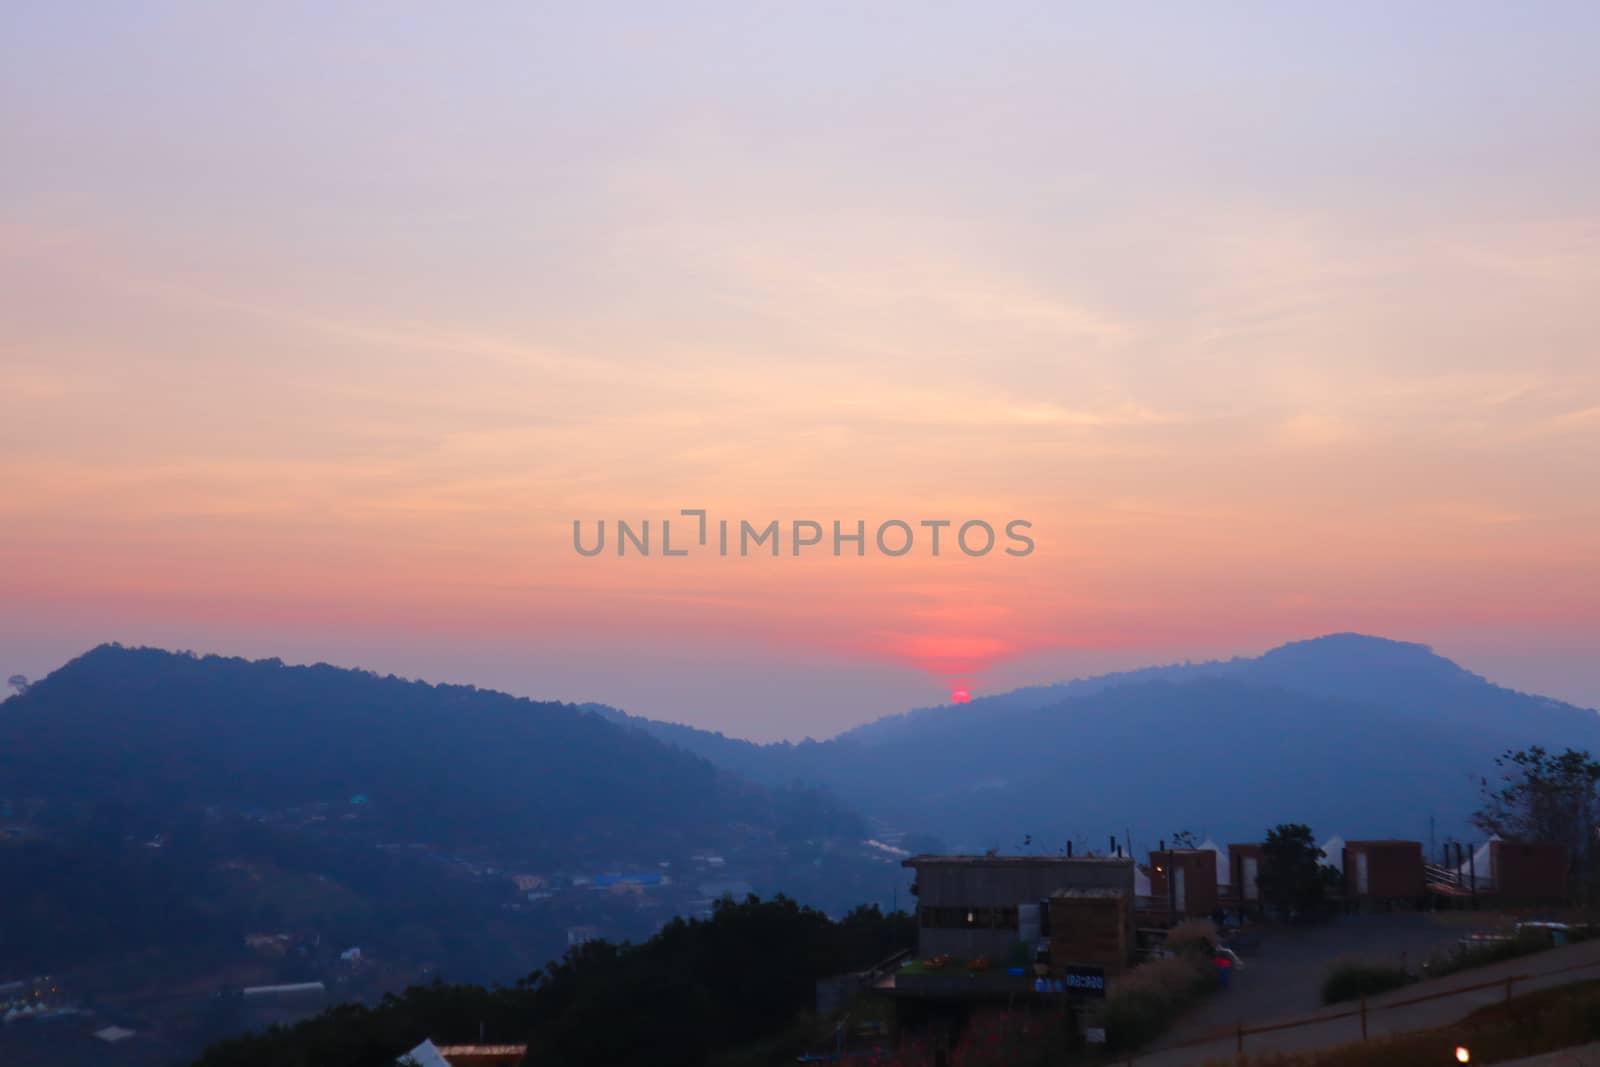 Colourful Sunset Over Panoramic Mountain in Chiang Mai, Thailand. The mountain scenery view